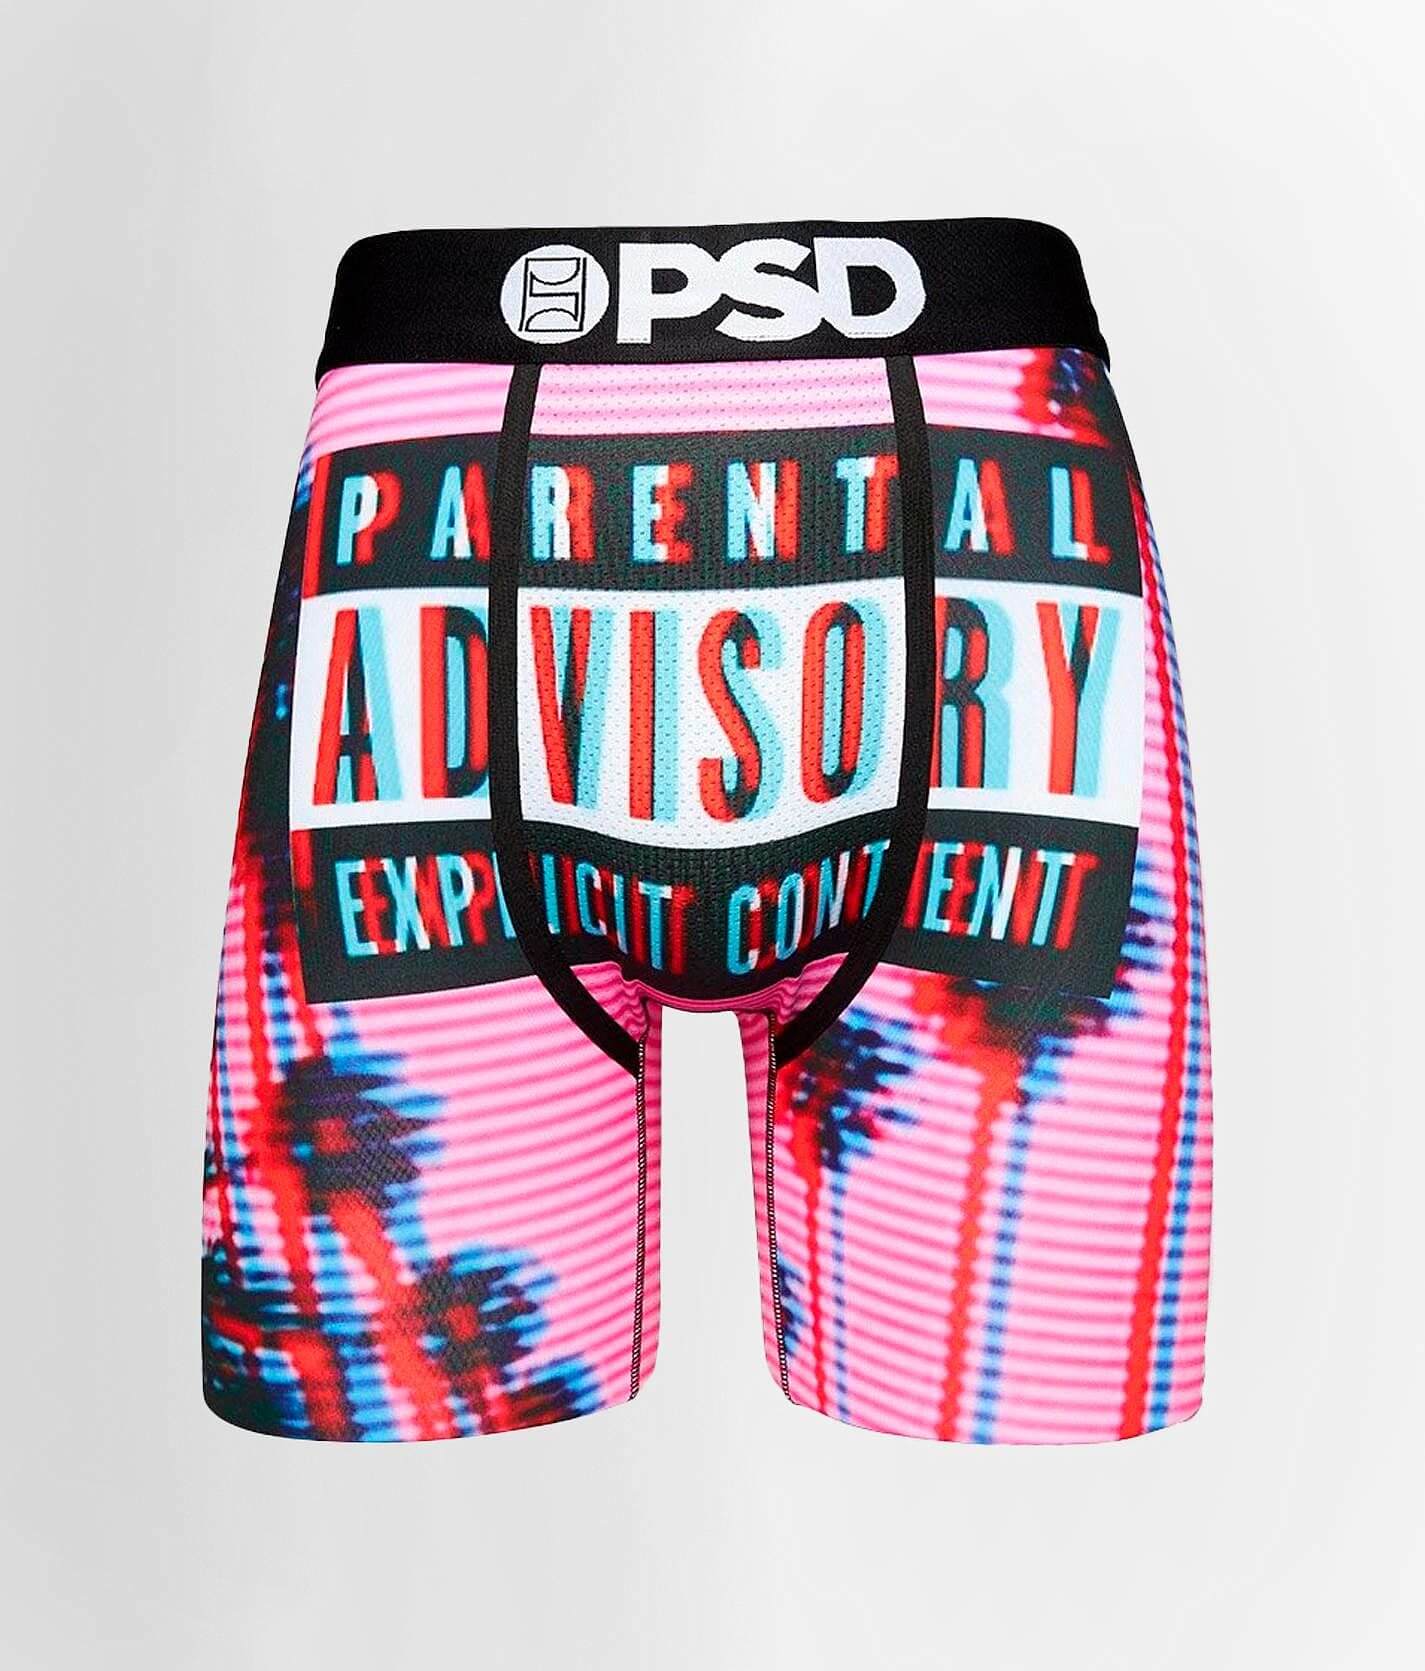 Download Psd Parental Advisory Stretch Boxer Brief Men S Boxers In Pink Buckle